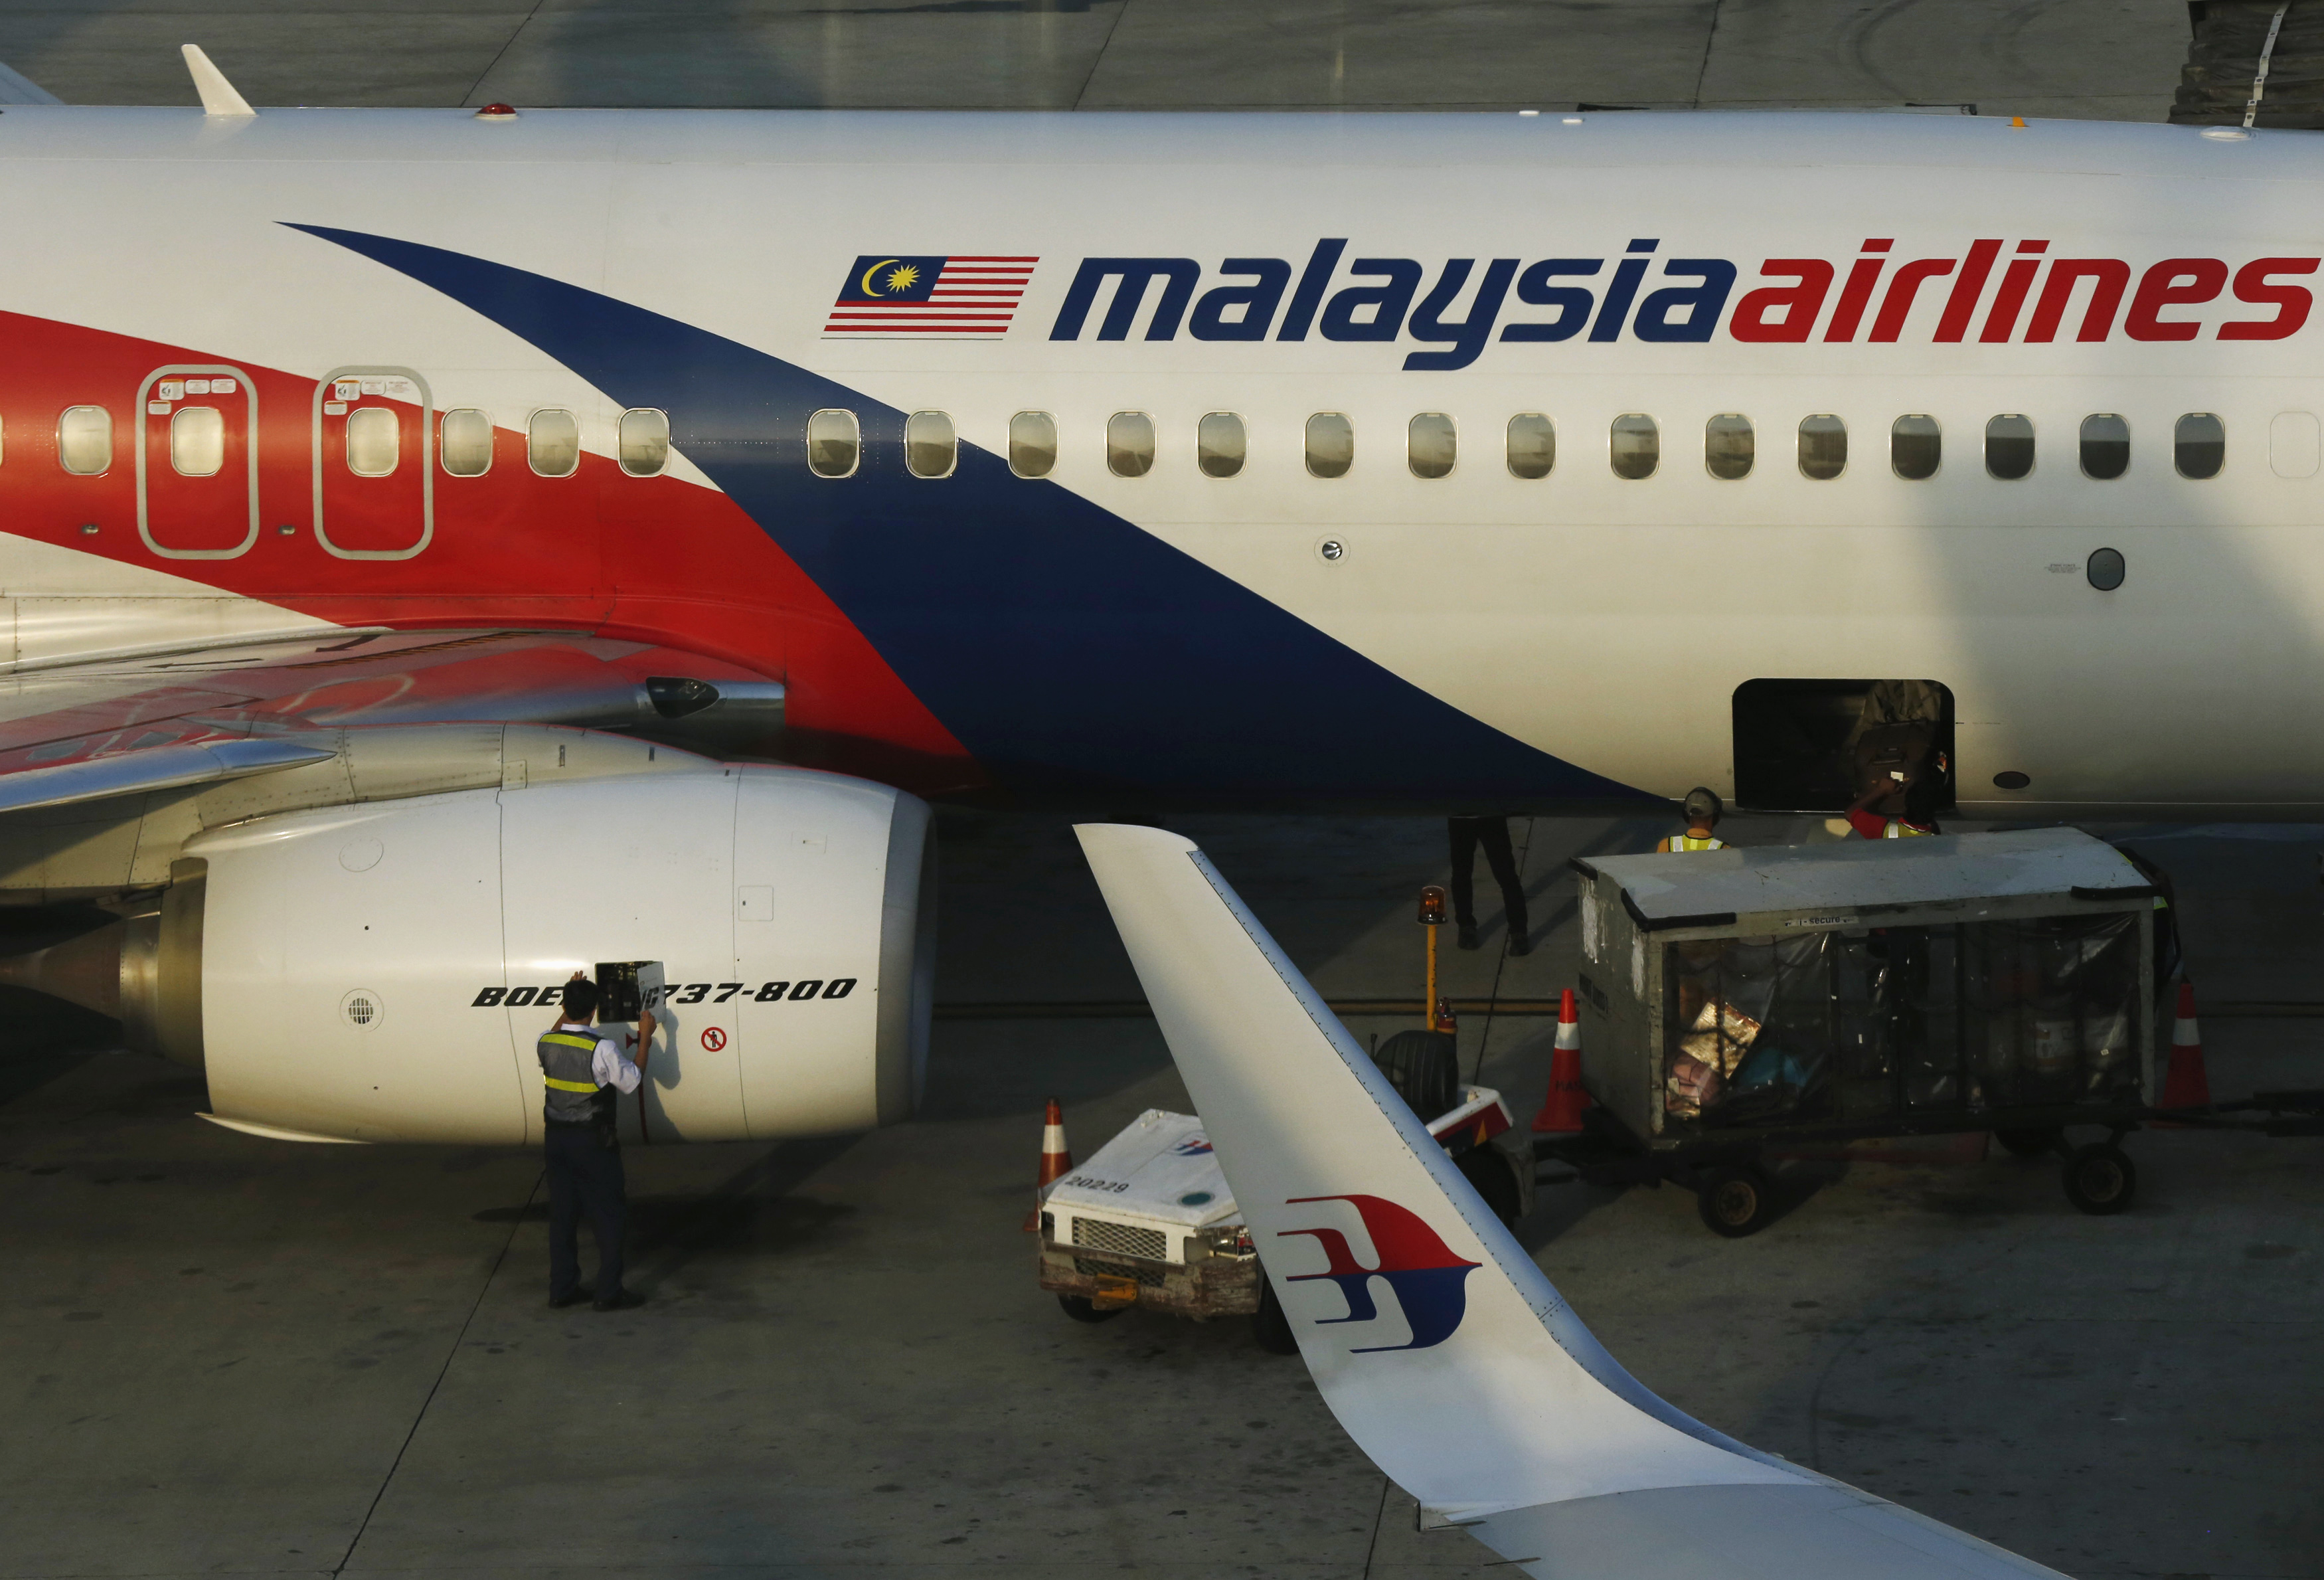 A member of ground crew works on a Malaysia Airlines Boeing 737-800 airplane on the runway at Kuala Lumpur International Airport on July 25, 2014 (Olivia Harris—Reuters)